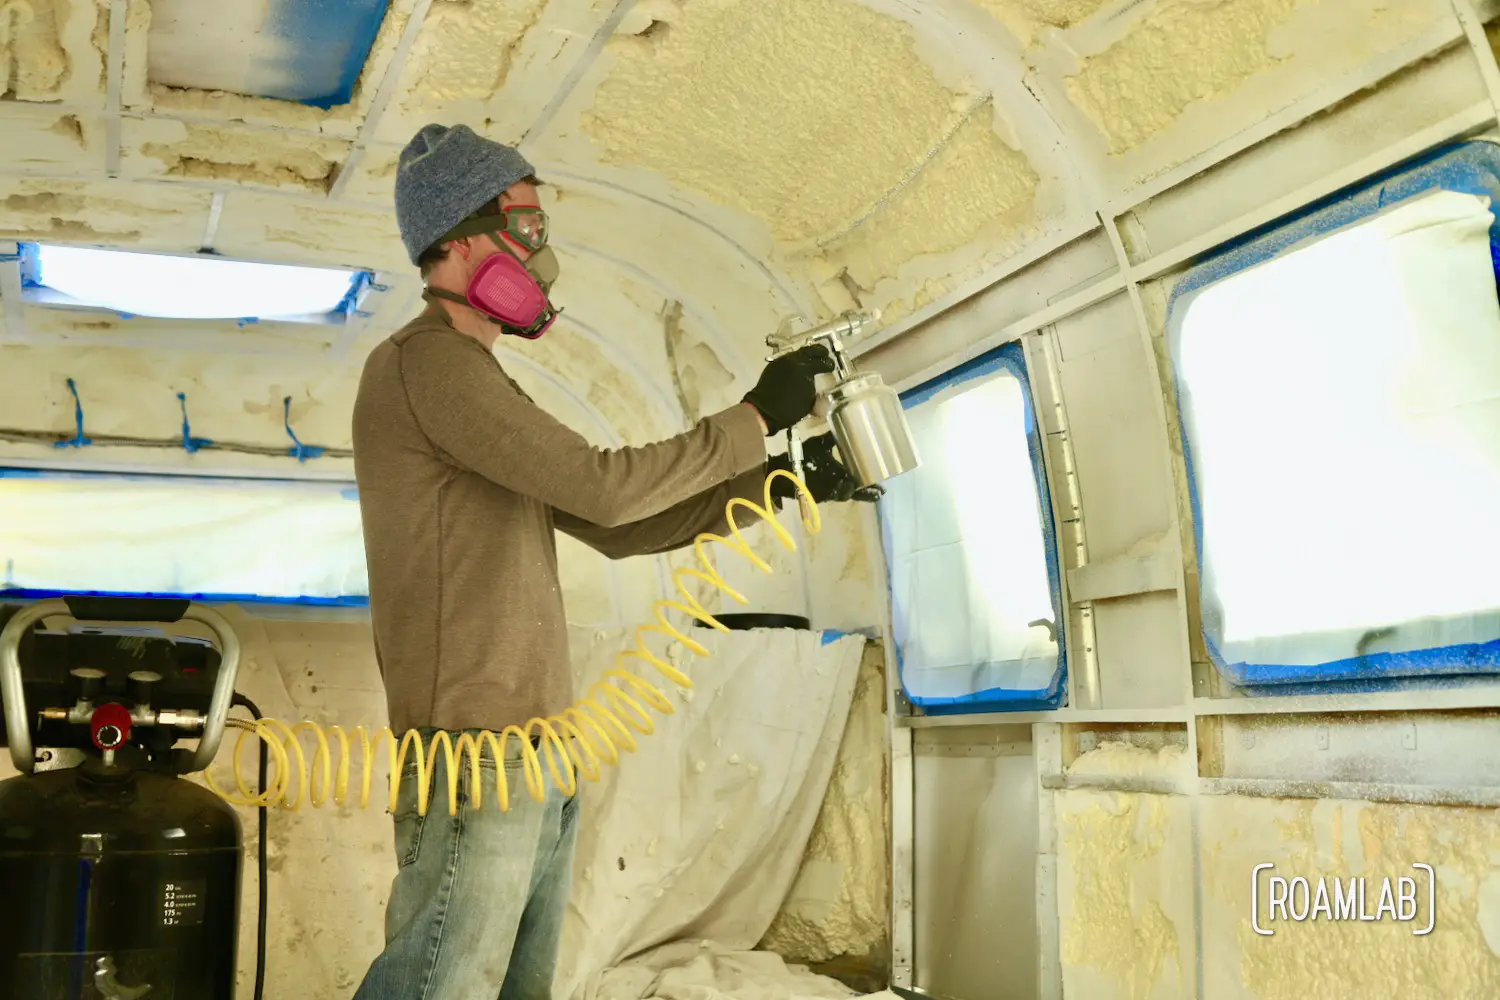 Man applying white paint inside a camper with a spray gun attached to an air compressor.